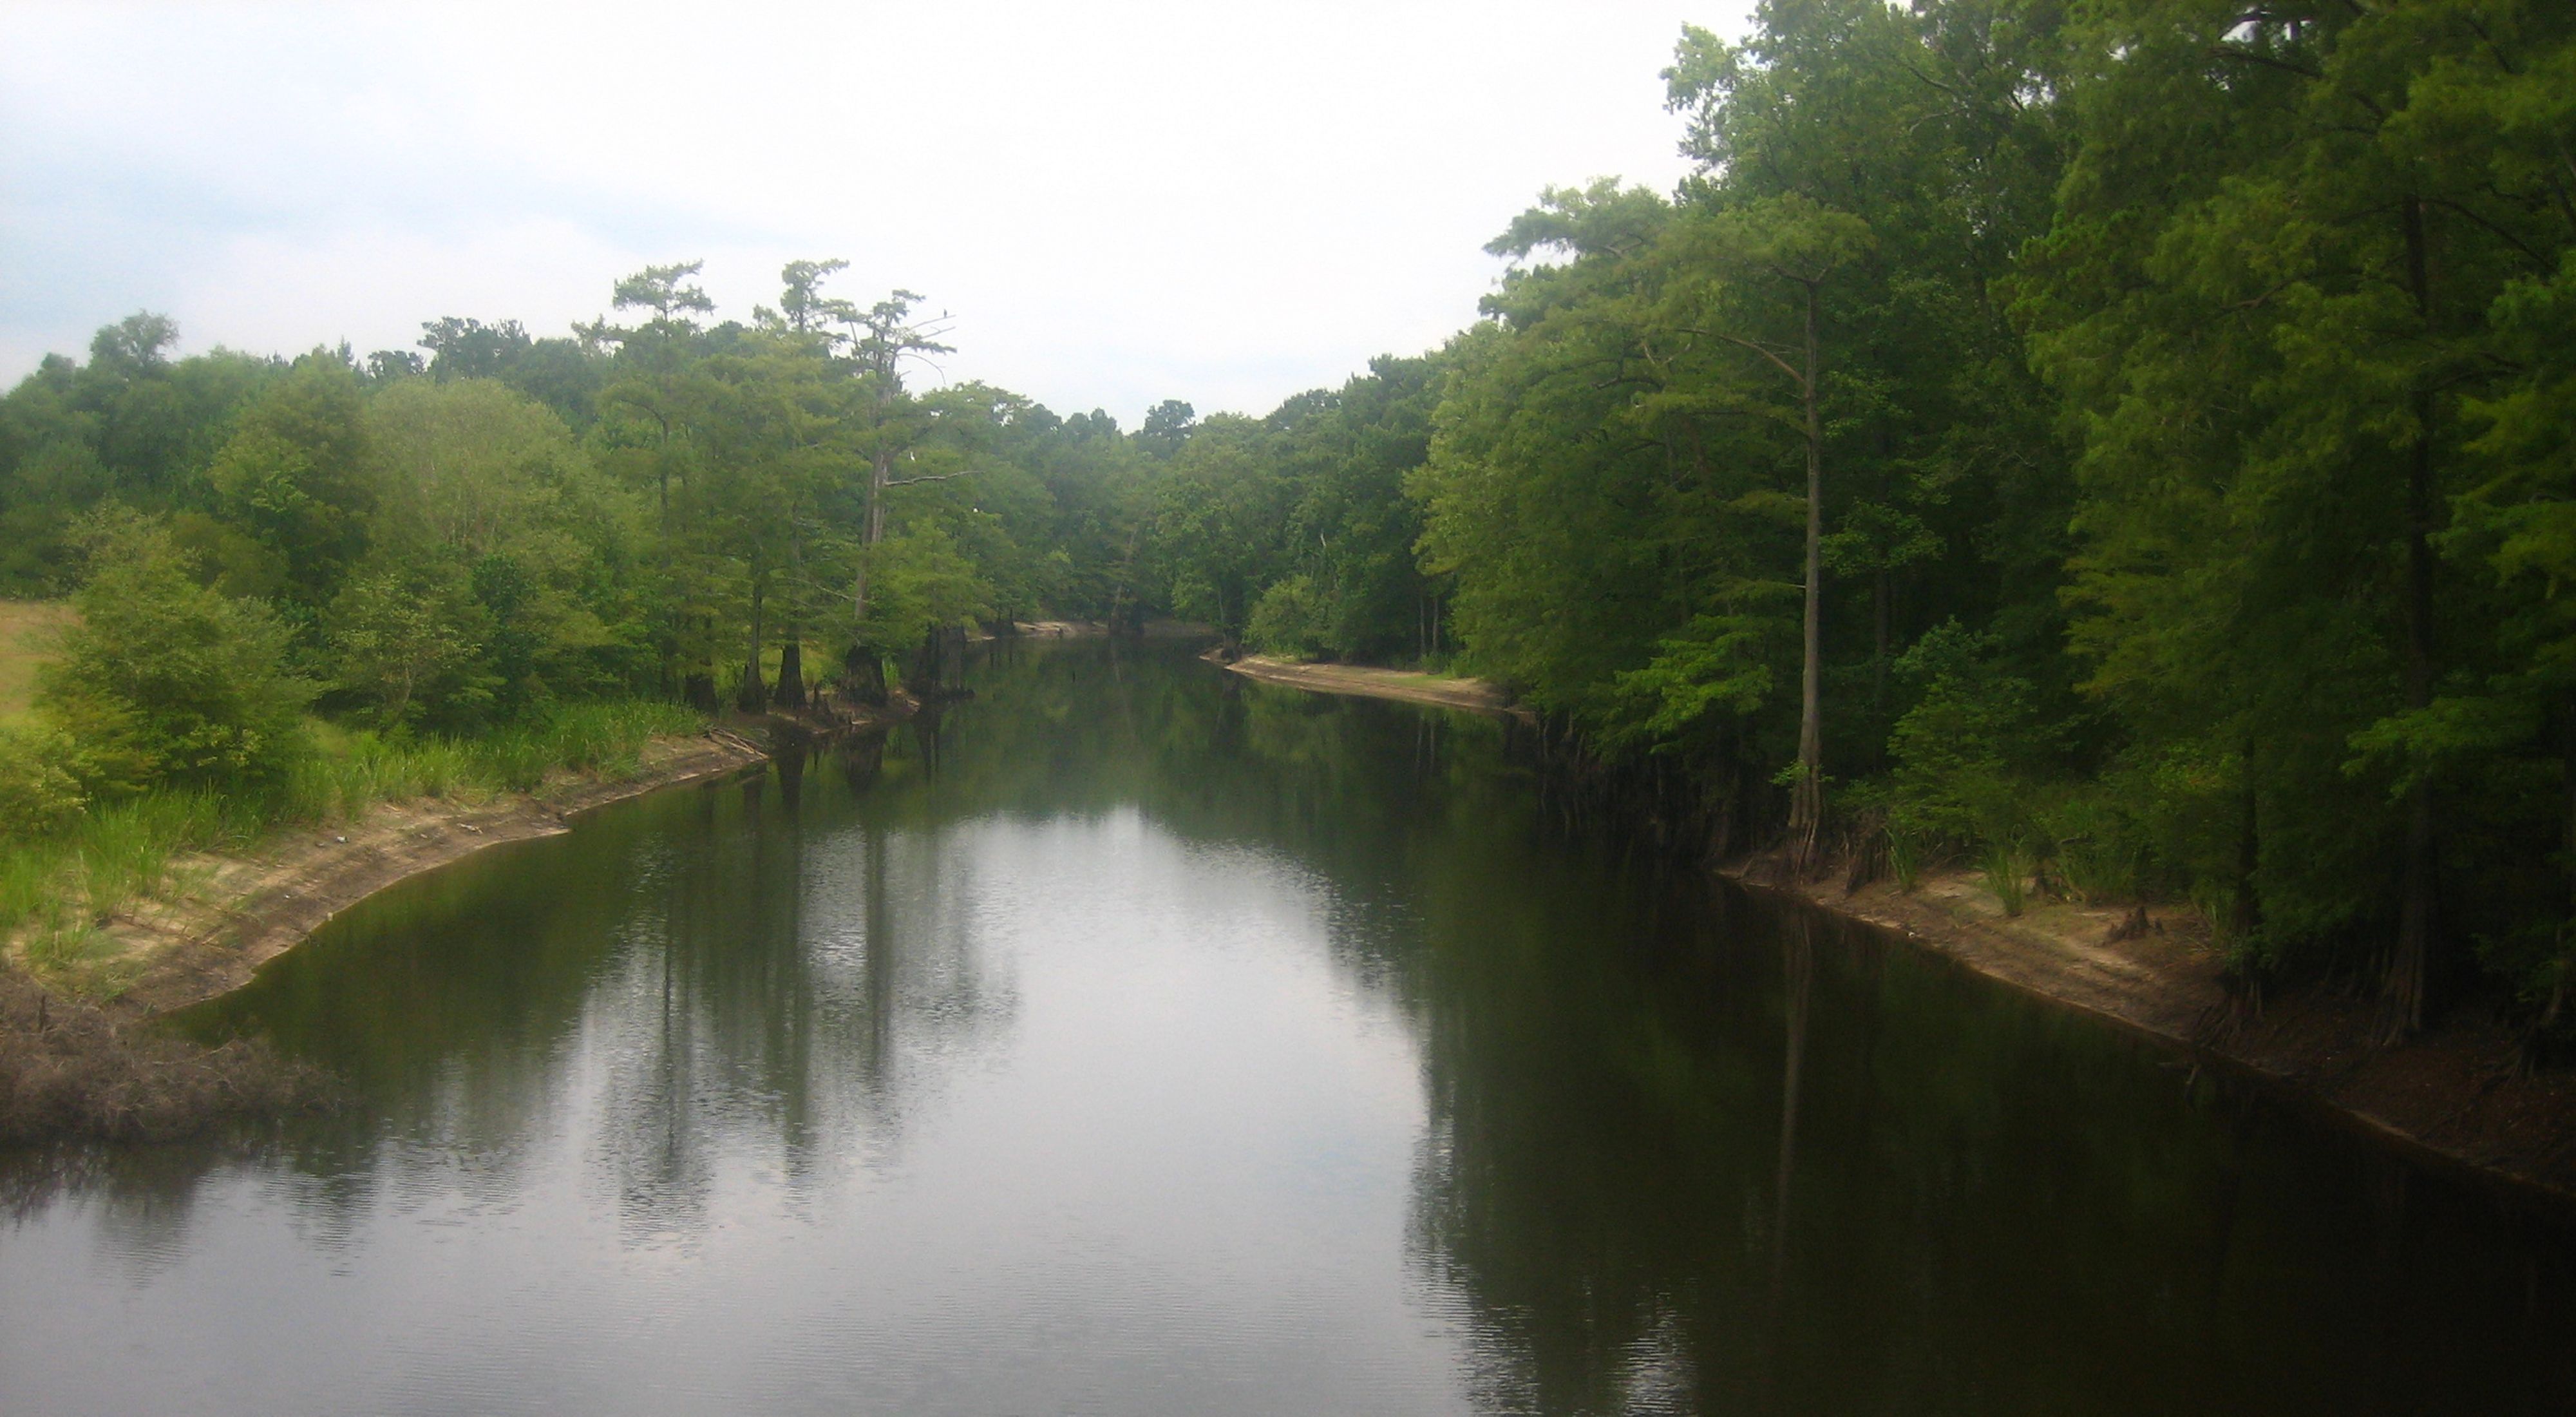 The calm waters of Bayou Dorcheat.